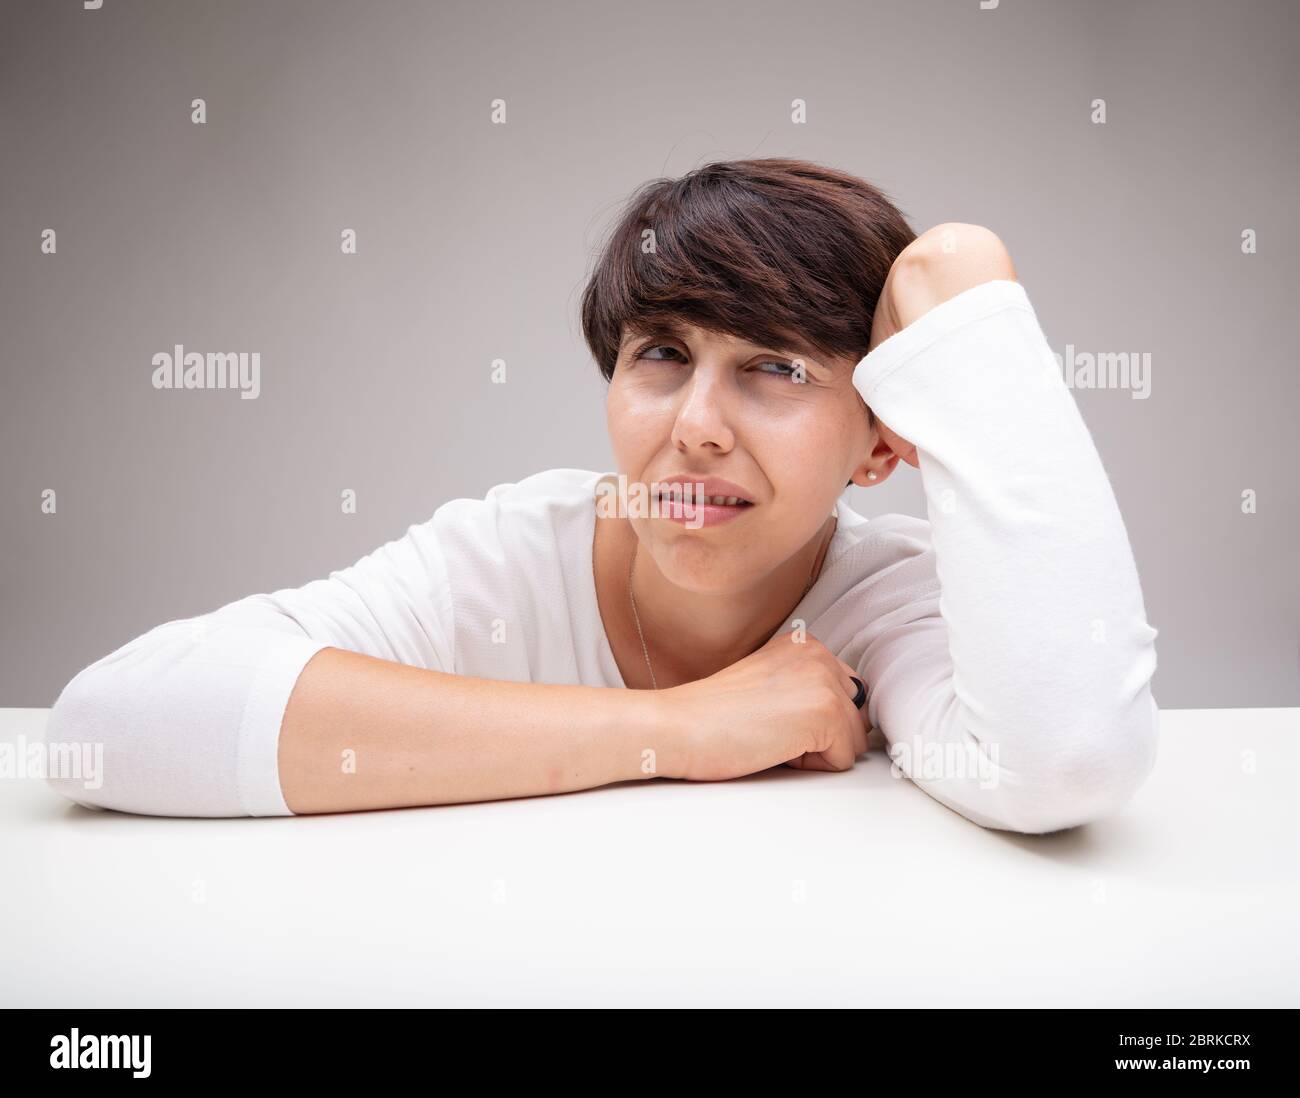 Puzzled or anxious woman deep in thought resting her head on her hand and elbow looking up with a frown of concentration in a close up portrait agains Stock Photo